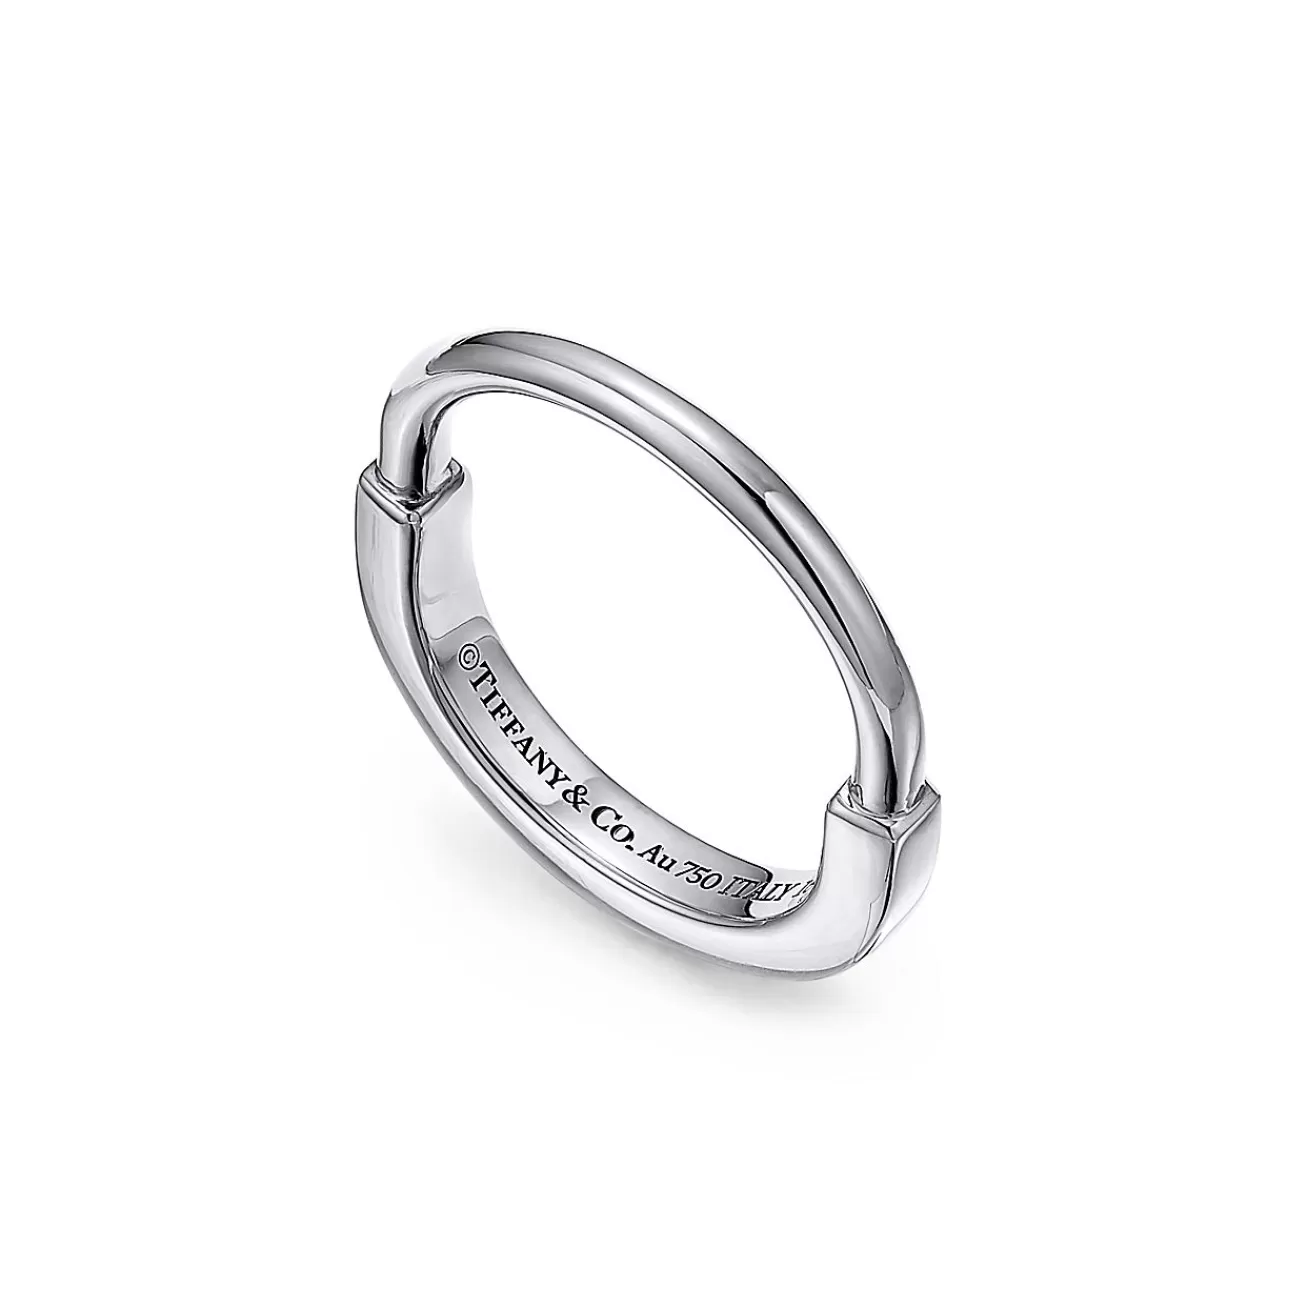 Tiffany & Co. Tiffany Lock Ring in White Gold | ^ Rings | Stacking Rings